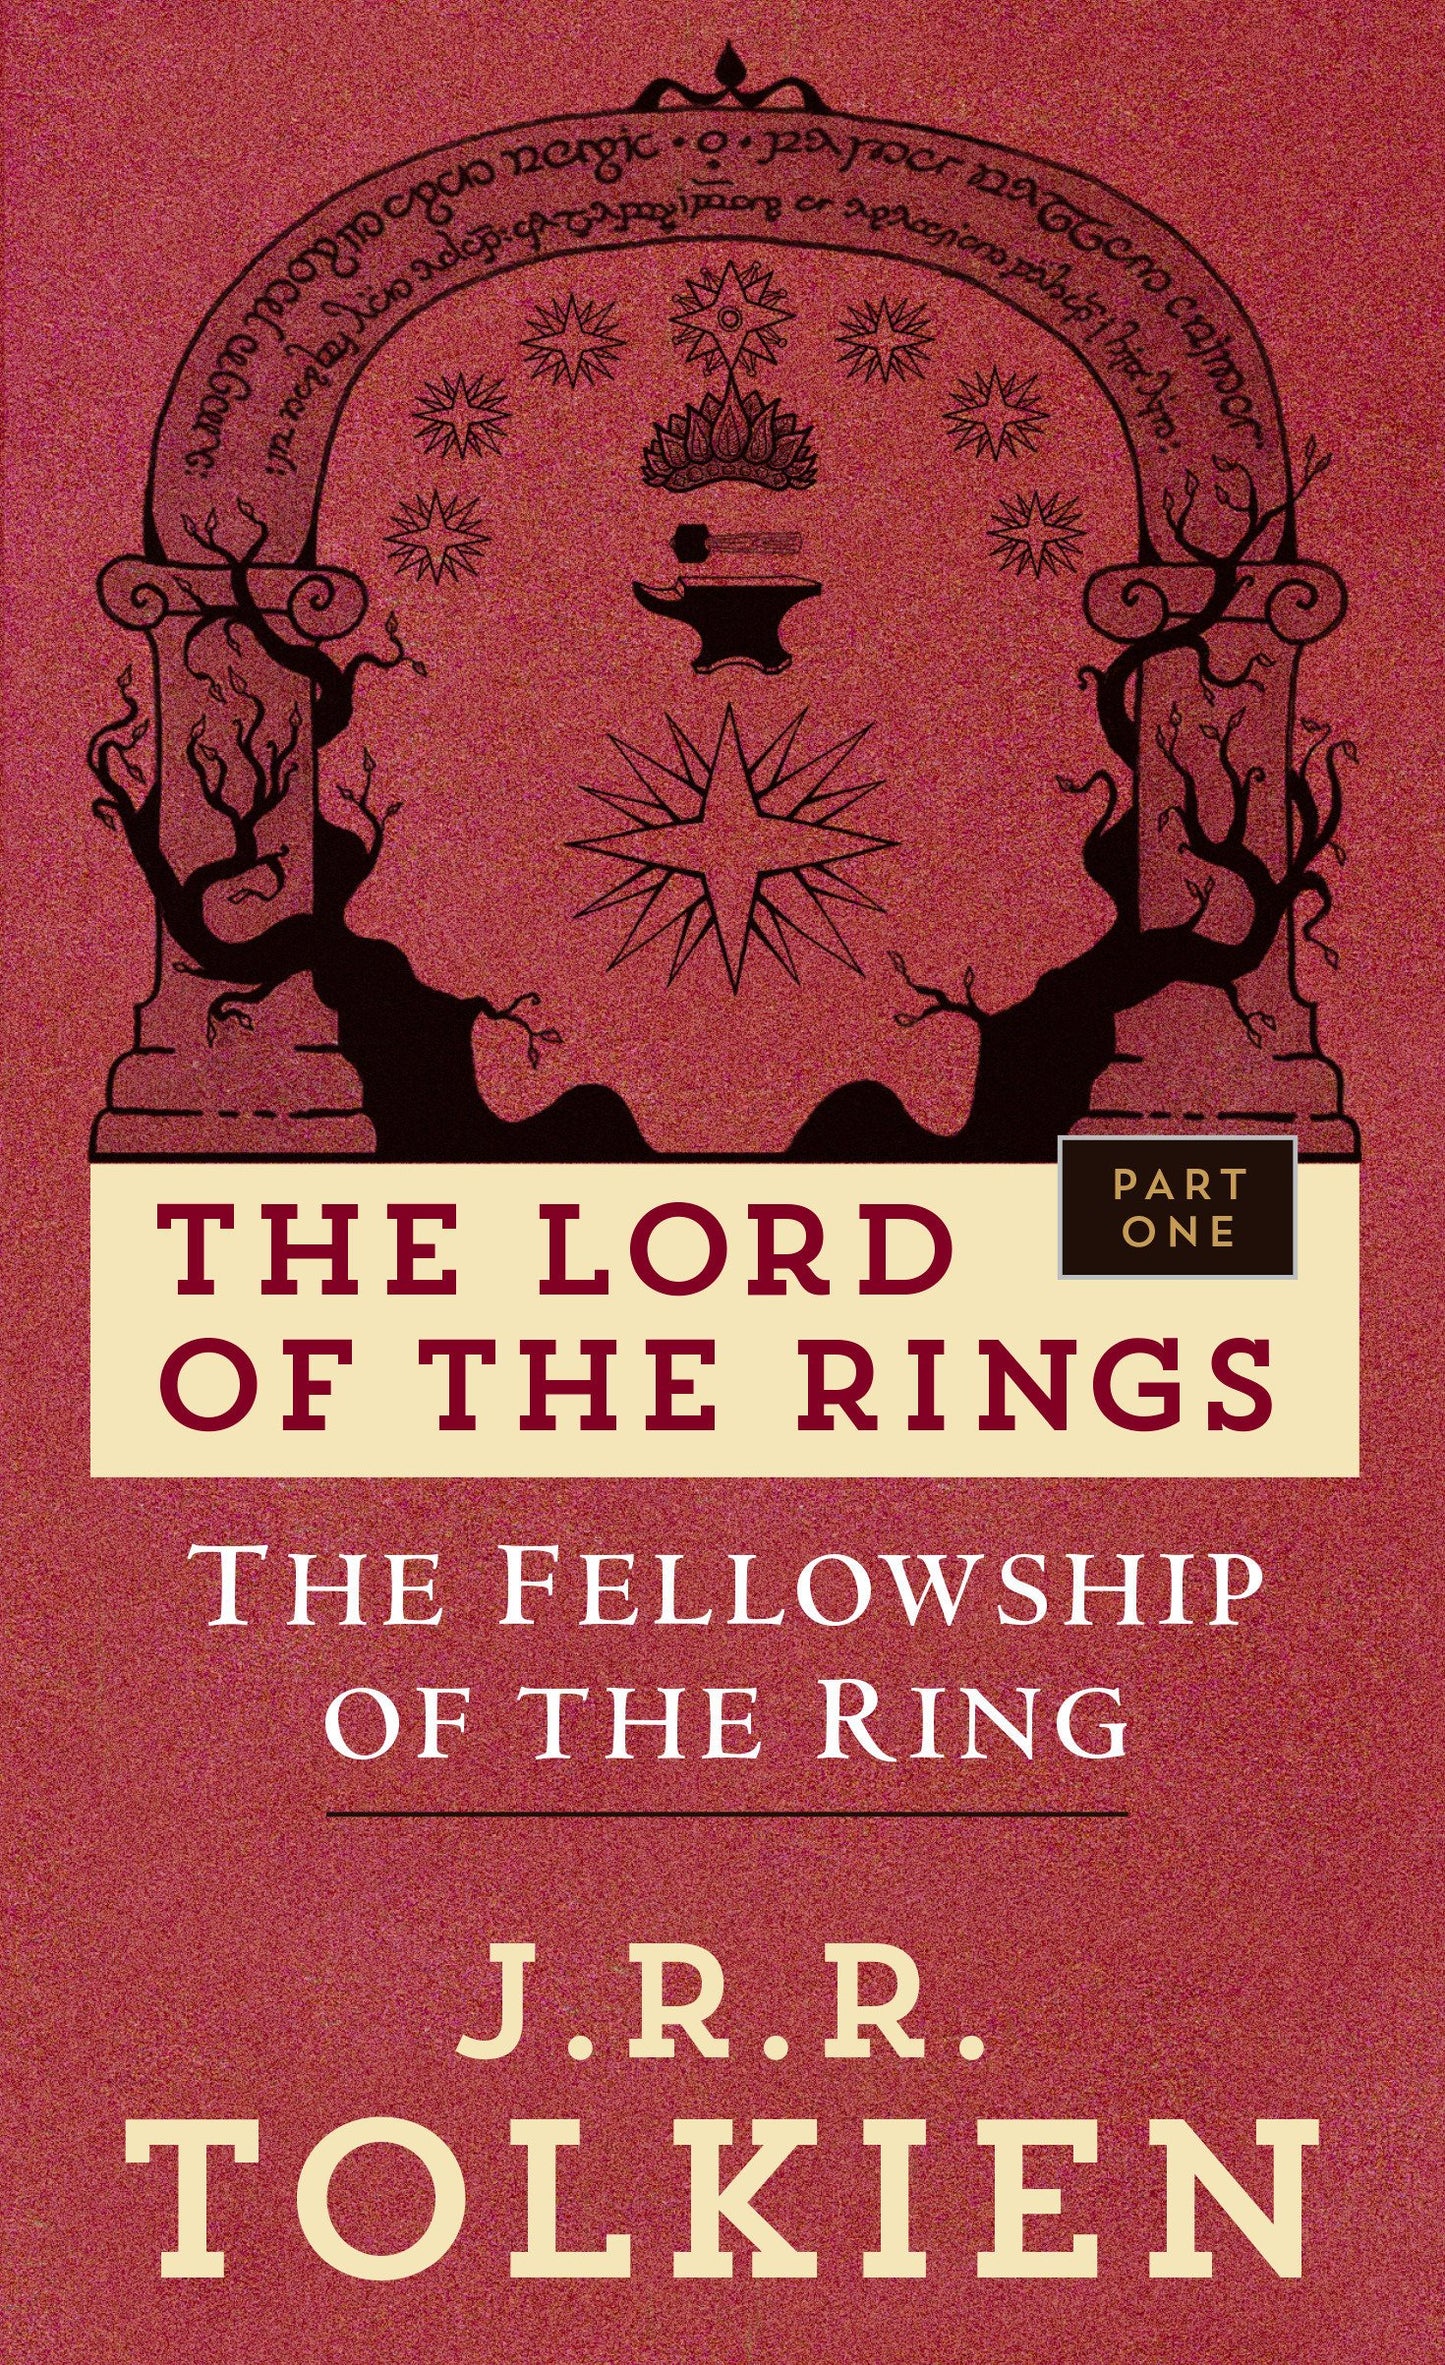 The Lord of the Rings book 1 : The Fellowship of the Ring - Booksondemand